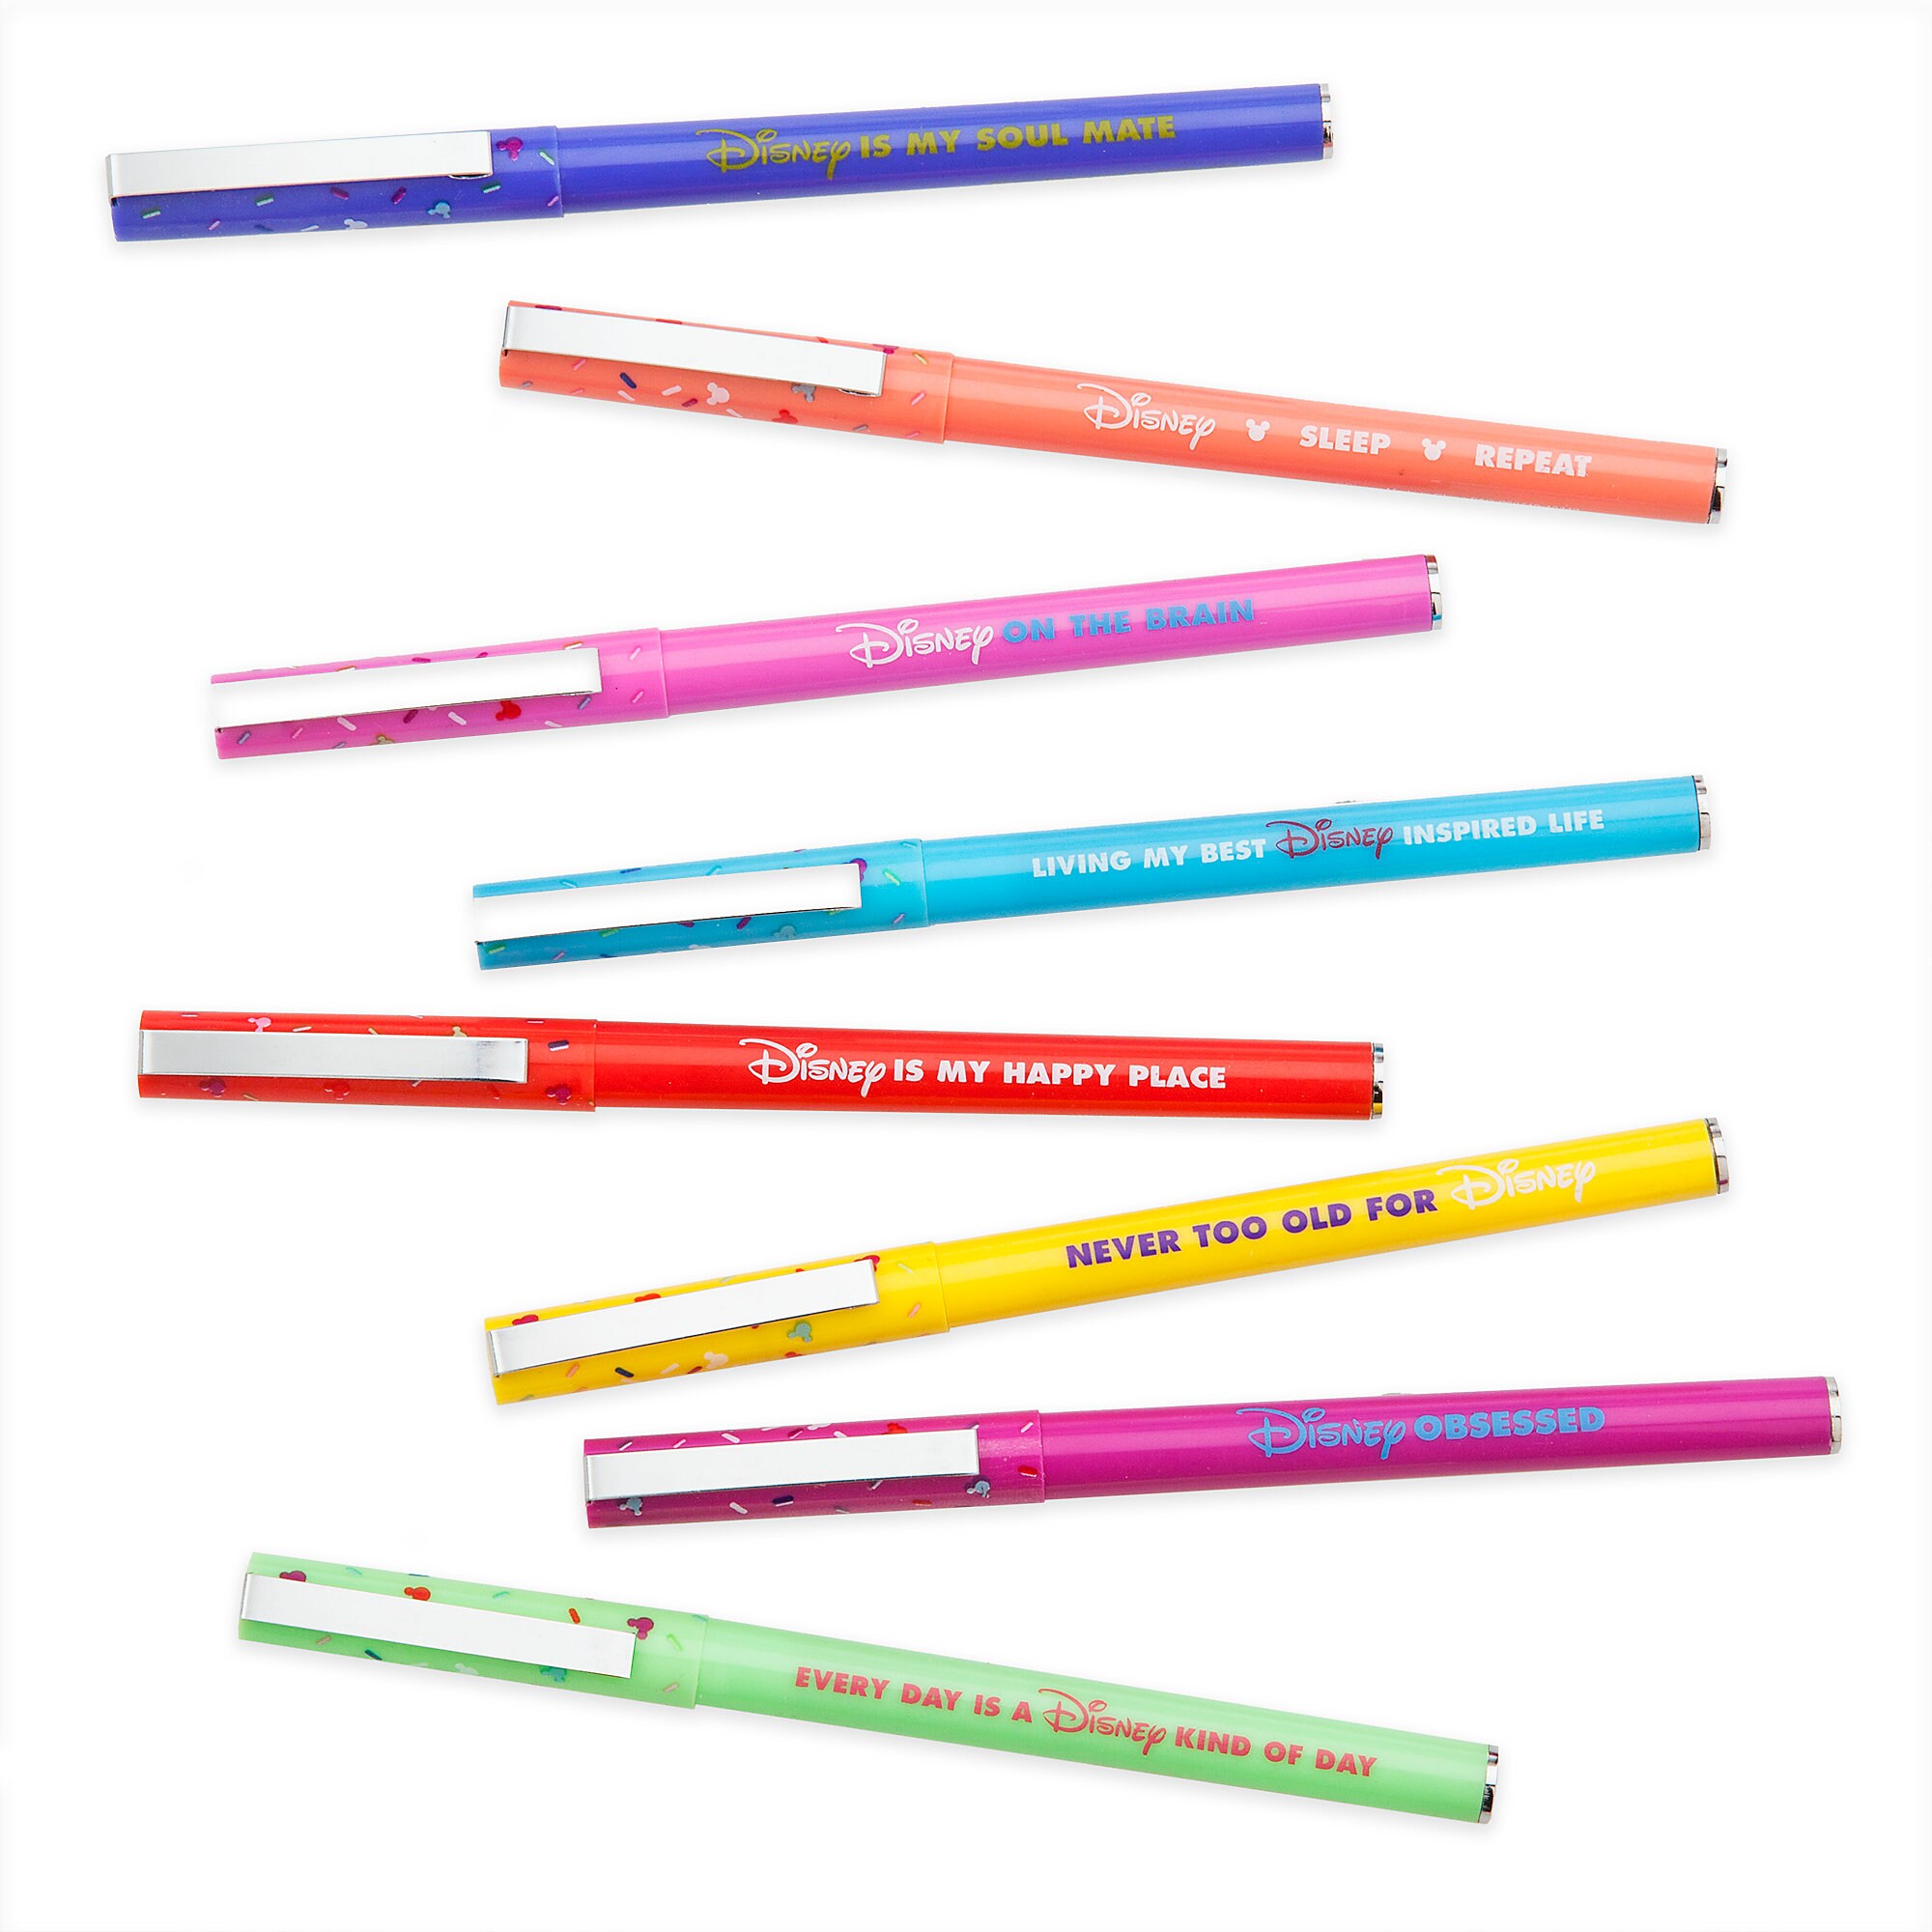 Mickey Mouse Donut Multi Colored Pen Set